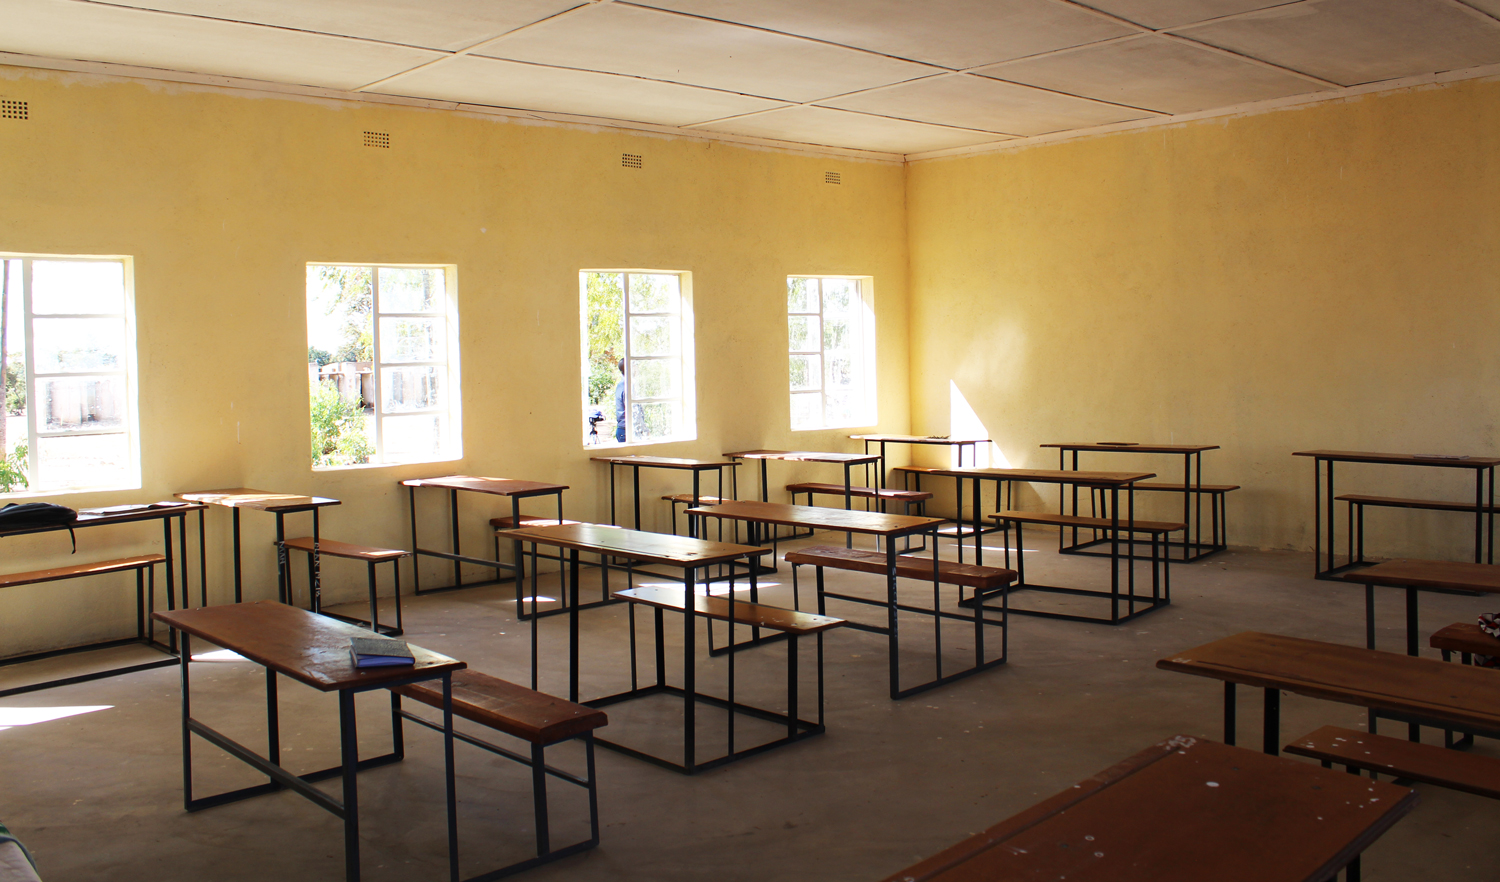 The new classroom blocks were furnished with new desks